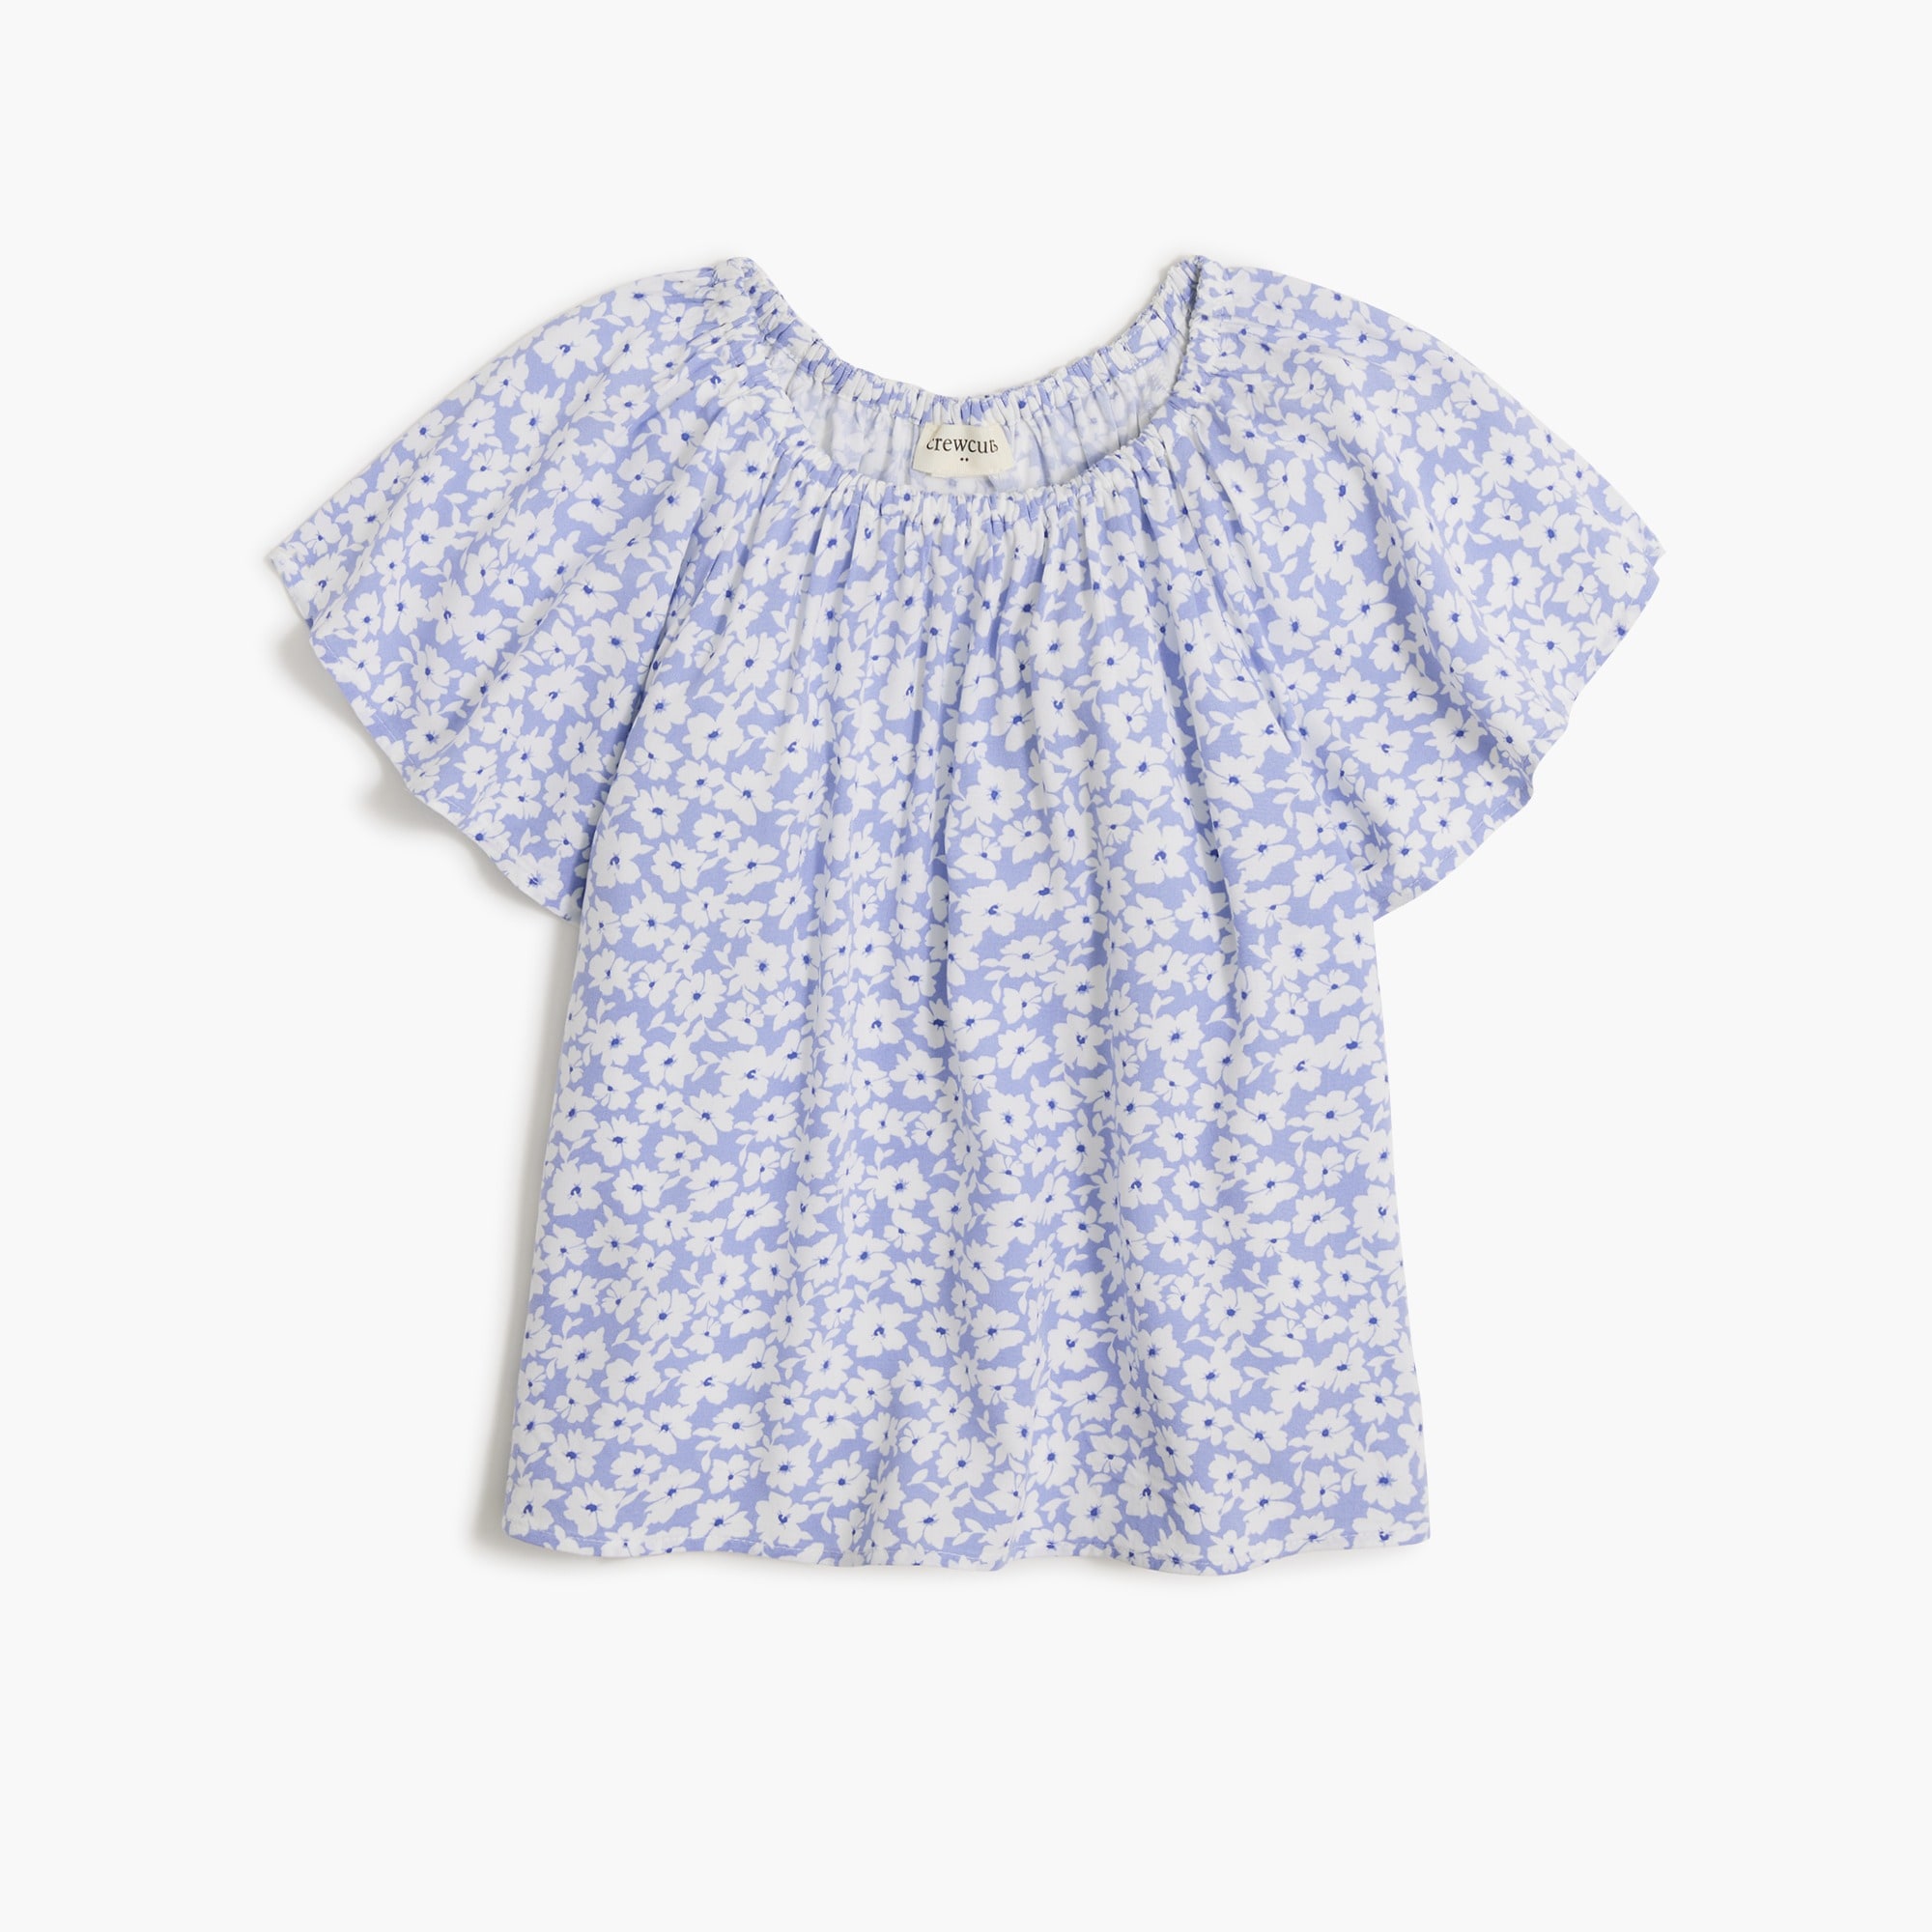 girls Girls' easy floral top